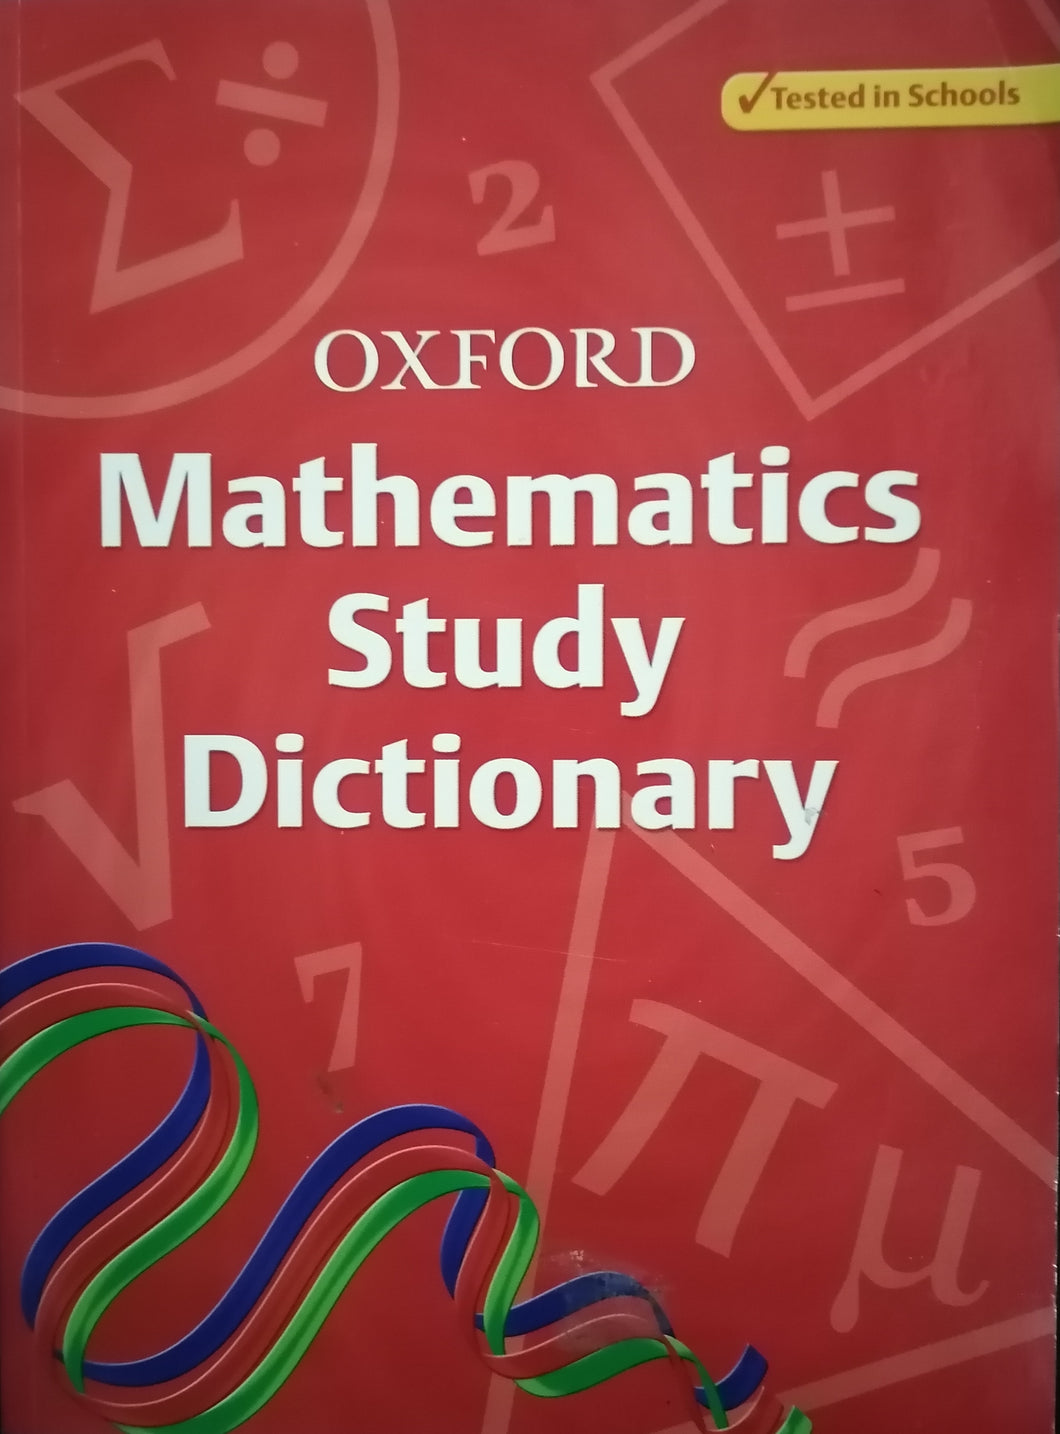 OXFORD Mathematics Study Dictionary By Frank Tapson